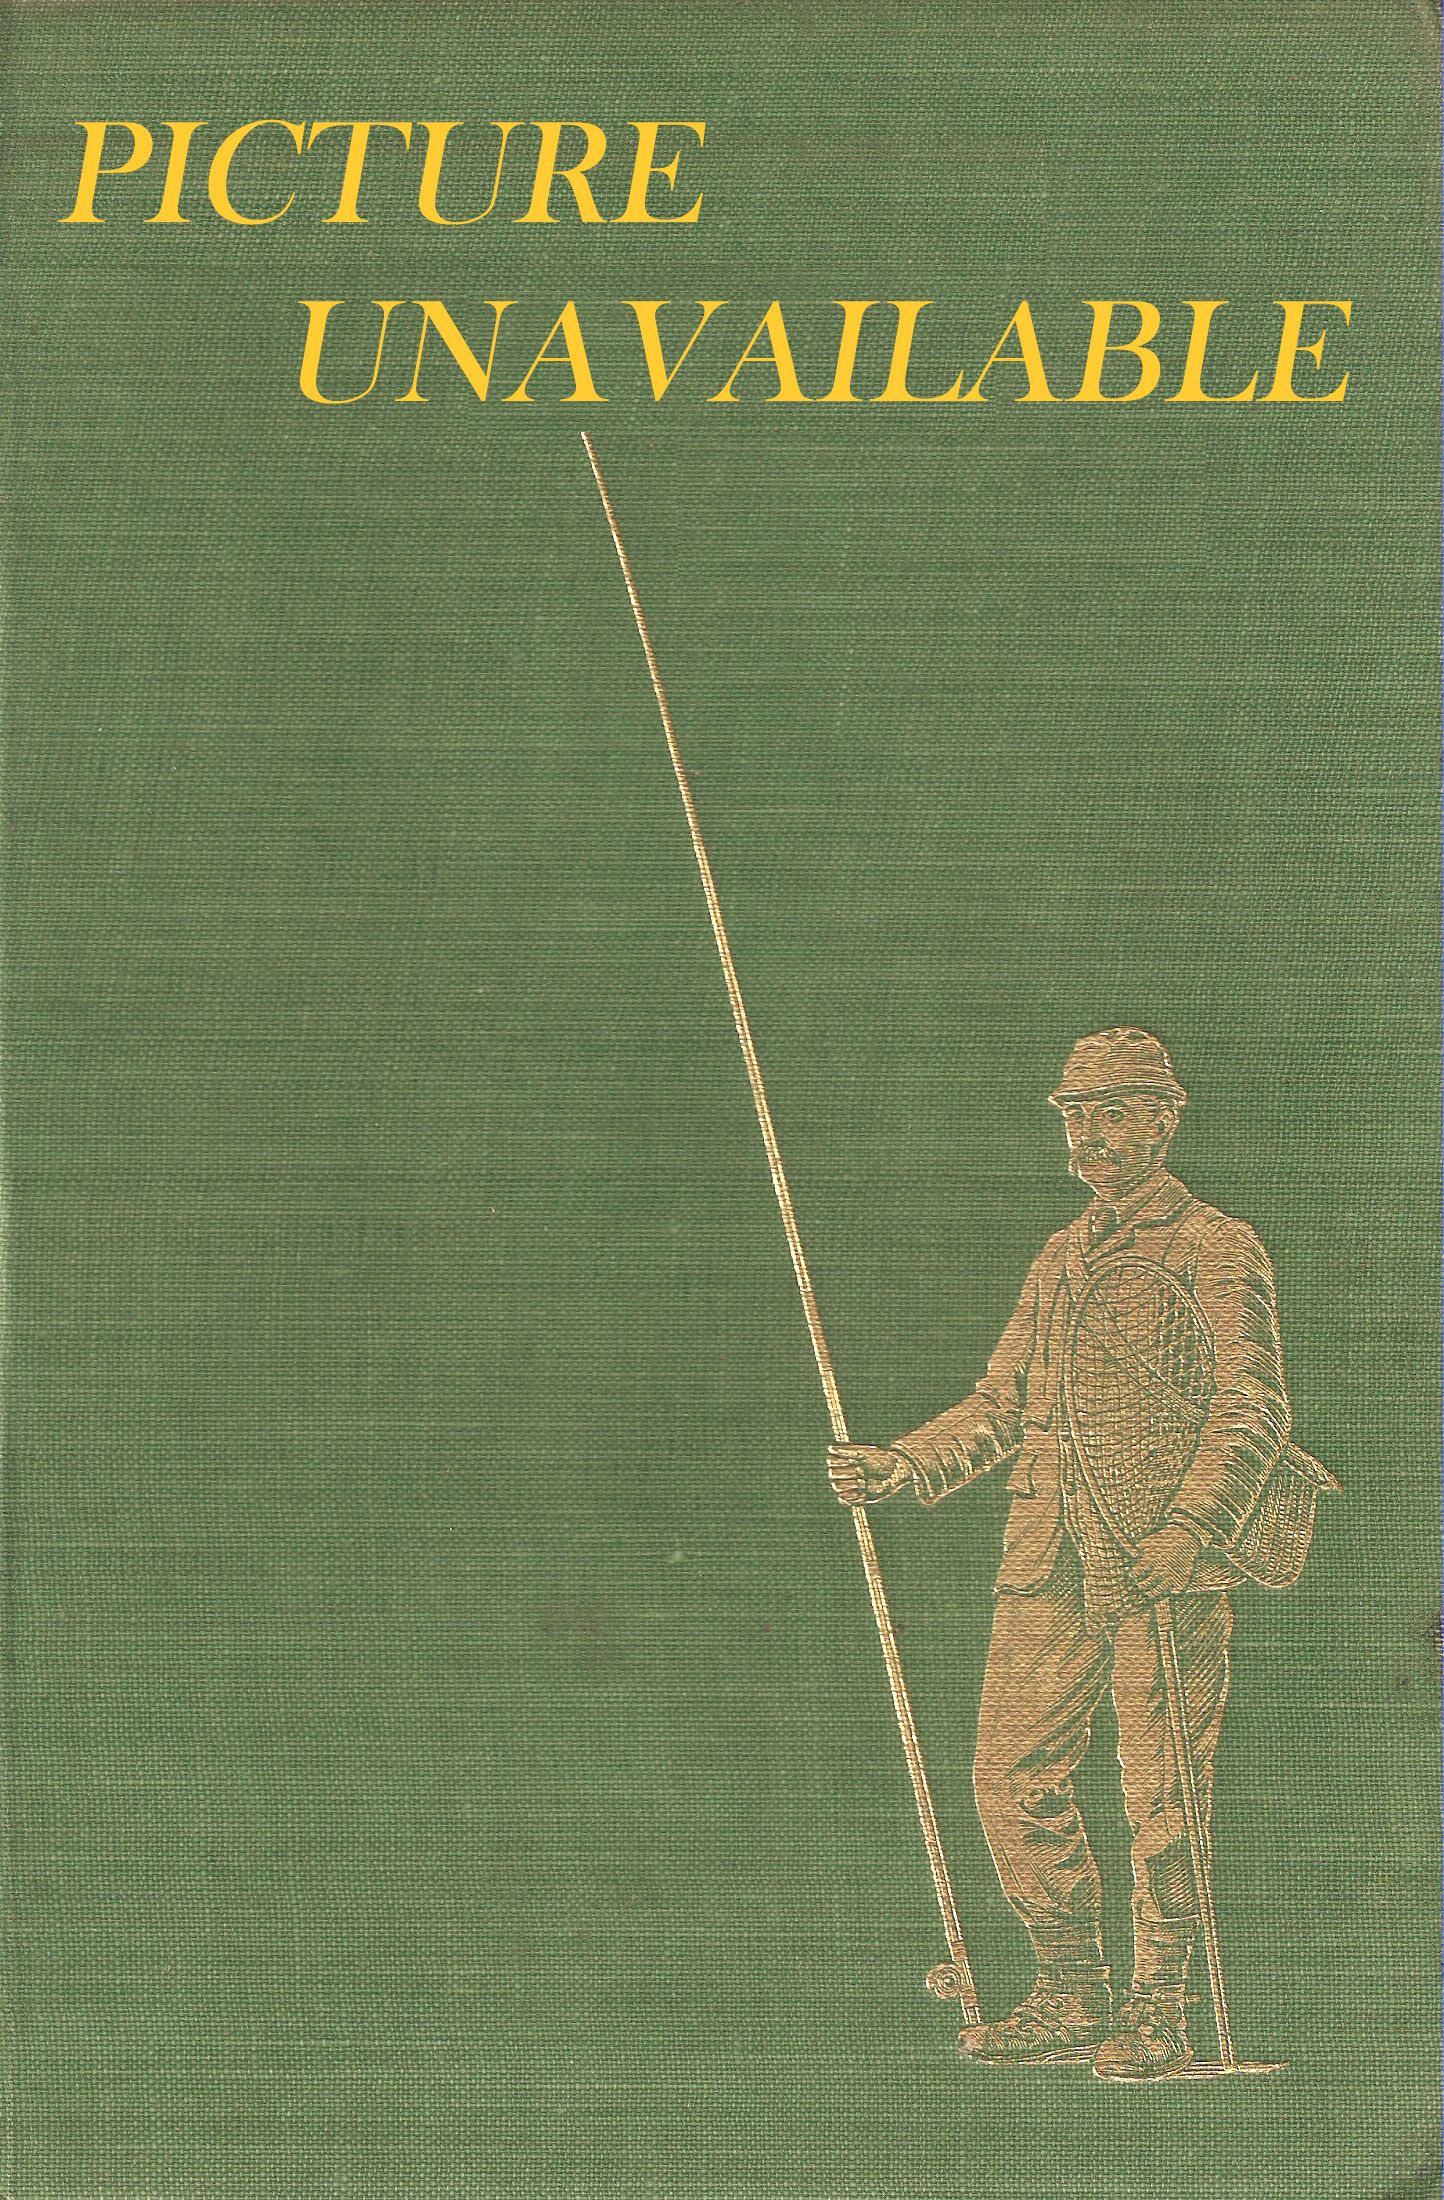 COURSING AND FALCONRY: The Badminton Library. By Harding Cox and Gerald  Lascelles. First edition. Decorative brown cloth issue.